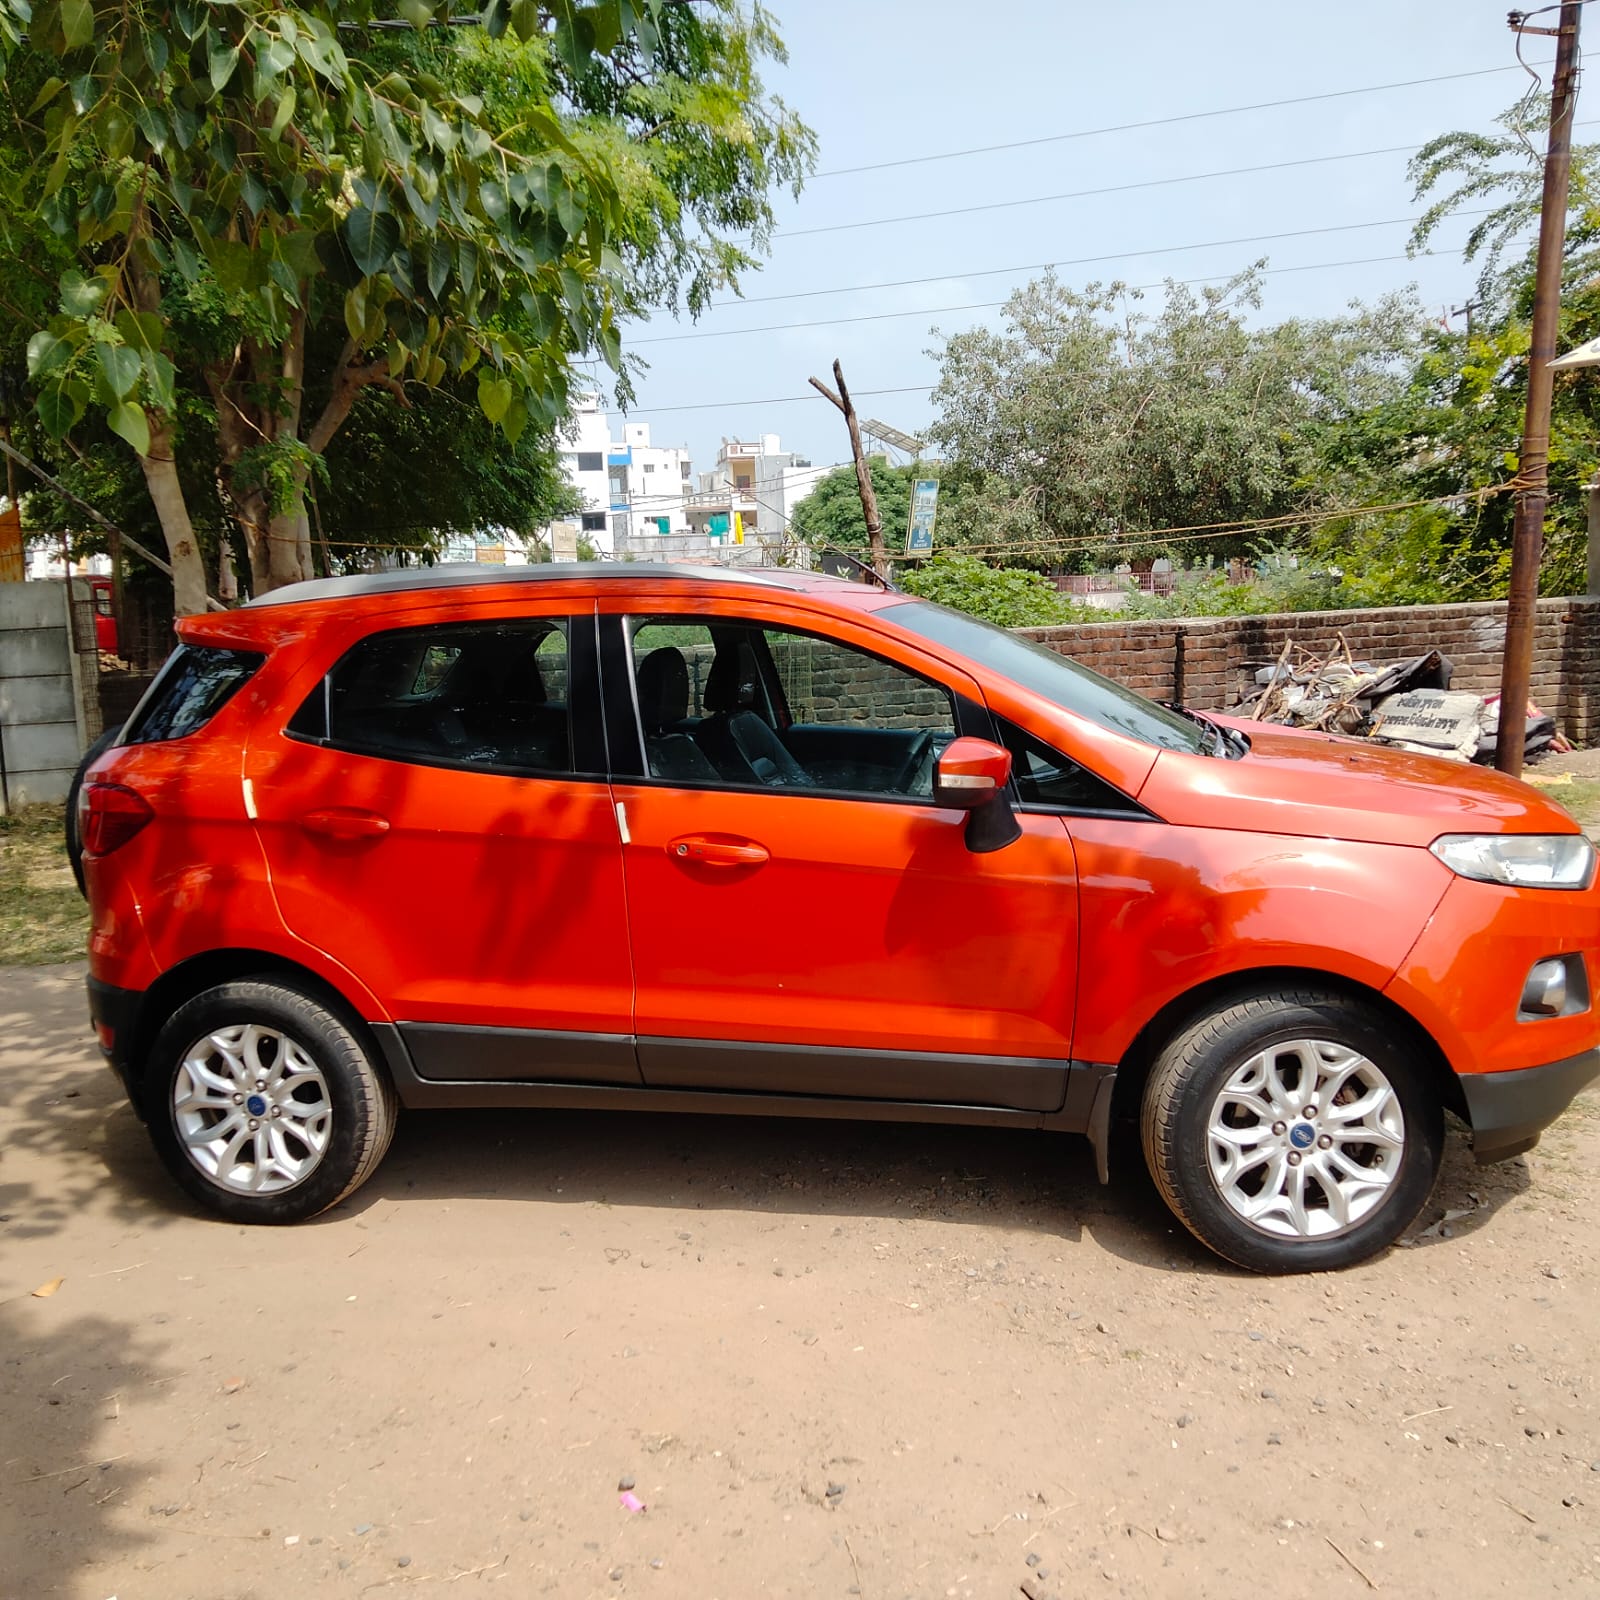 Details View - Ford EcoSport photos - reseller,reseller marketplace,advetising your products,reseller bazzar,resellerbazzar.in,india's classified site,Ford EcoSport , used Ford EcoSport , old Ford EcoSport , old Ford EcoSport in Vadodara , Ford EcoSport in Vadodara